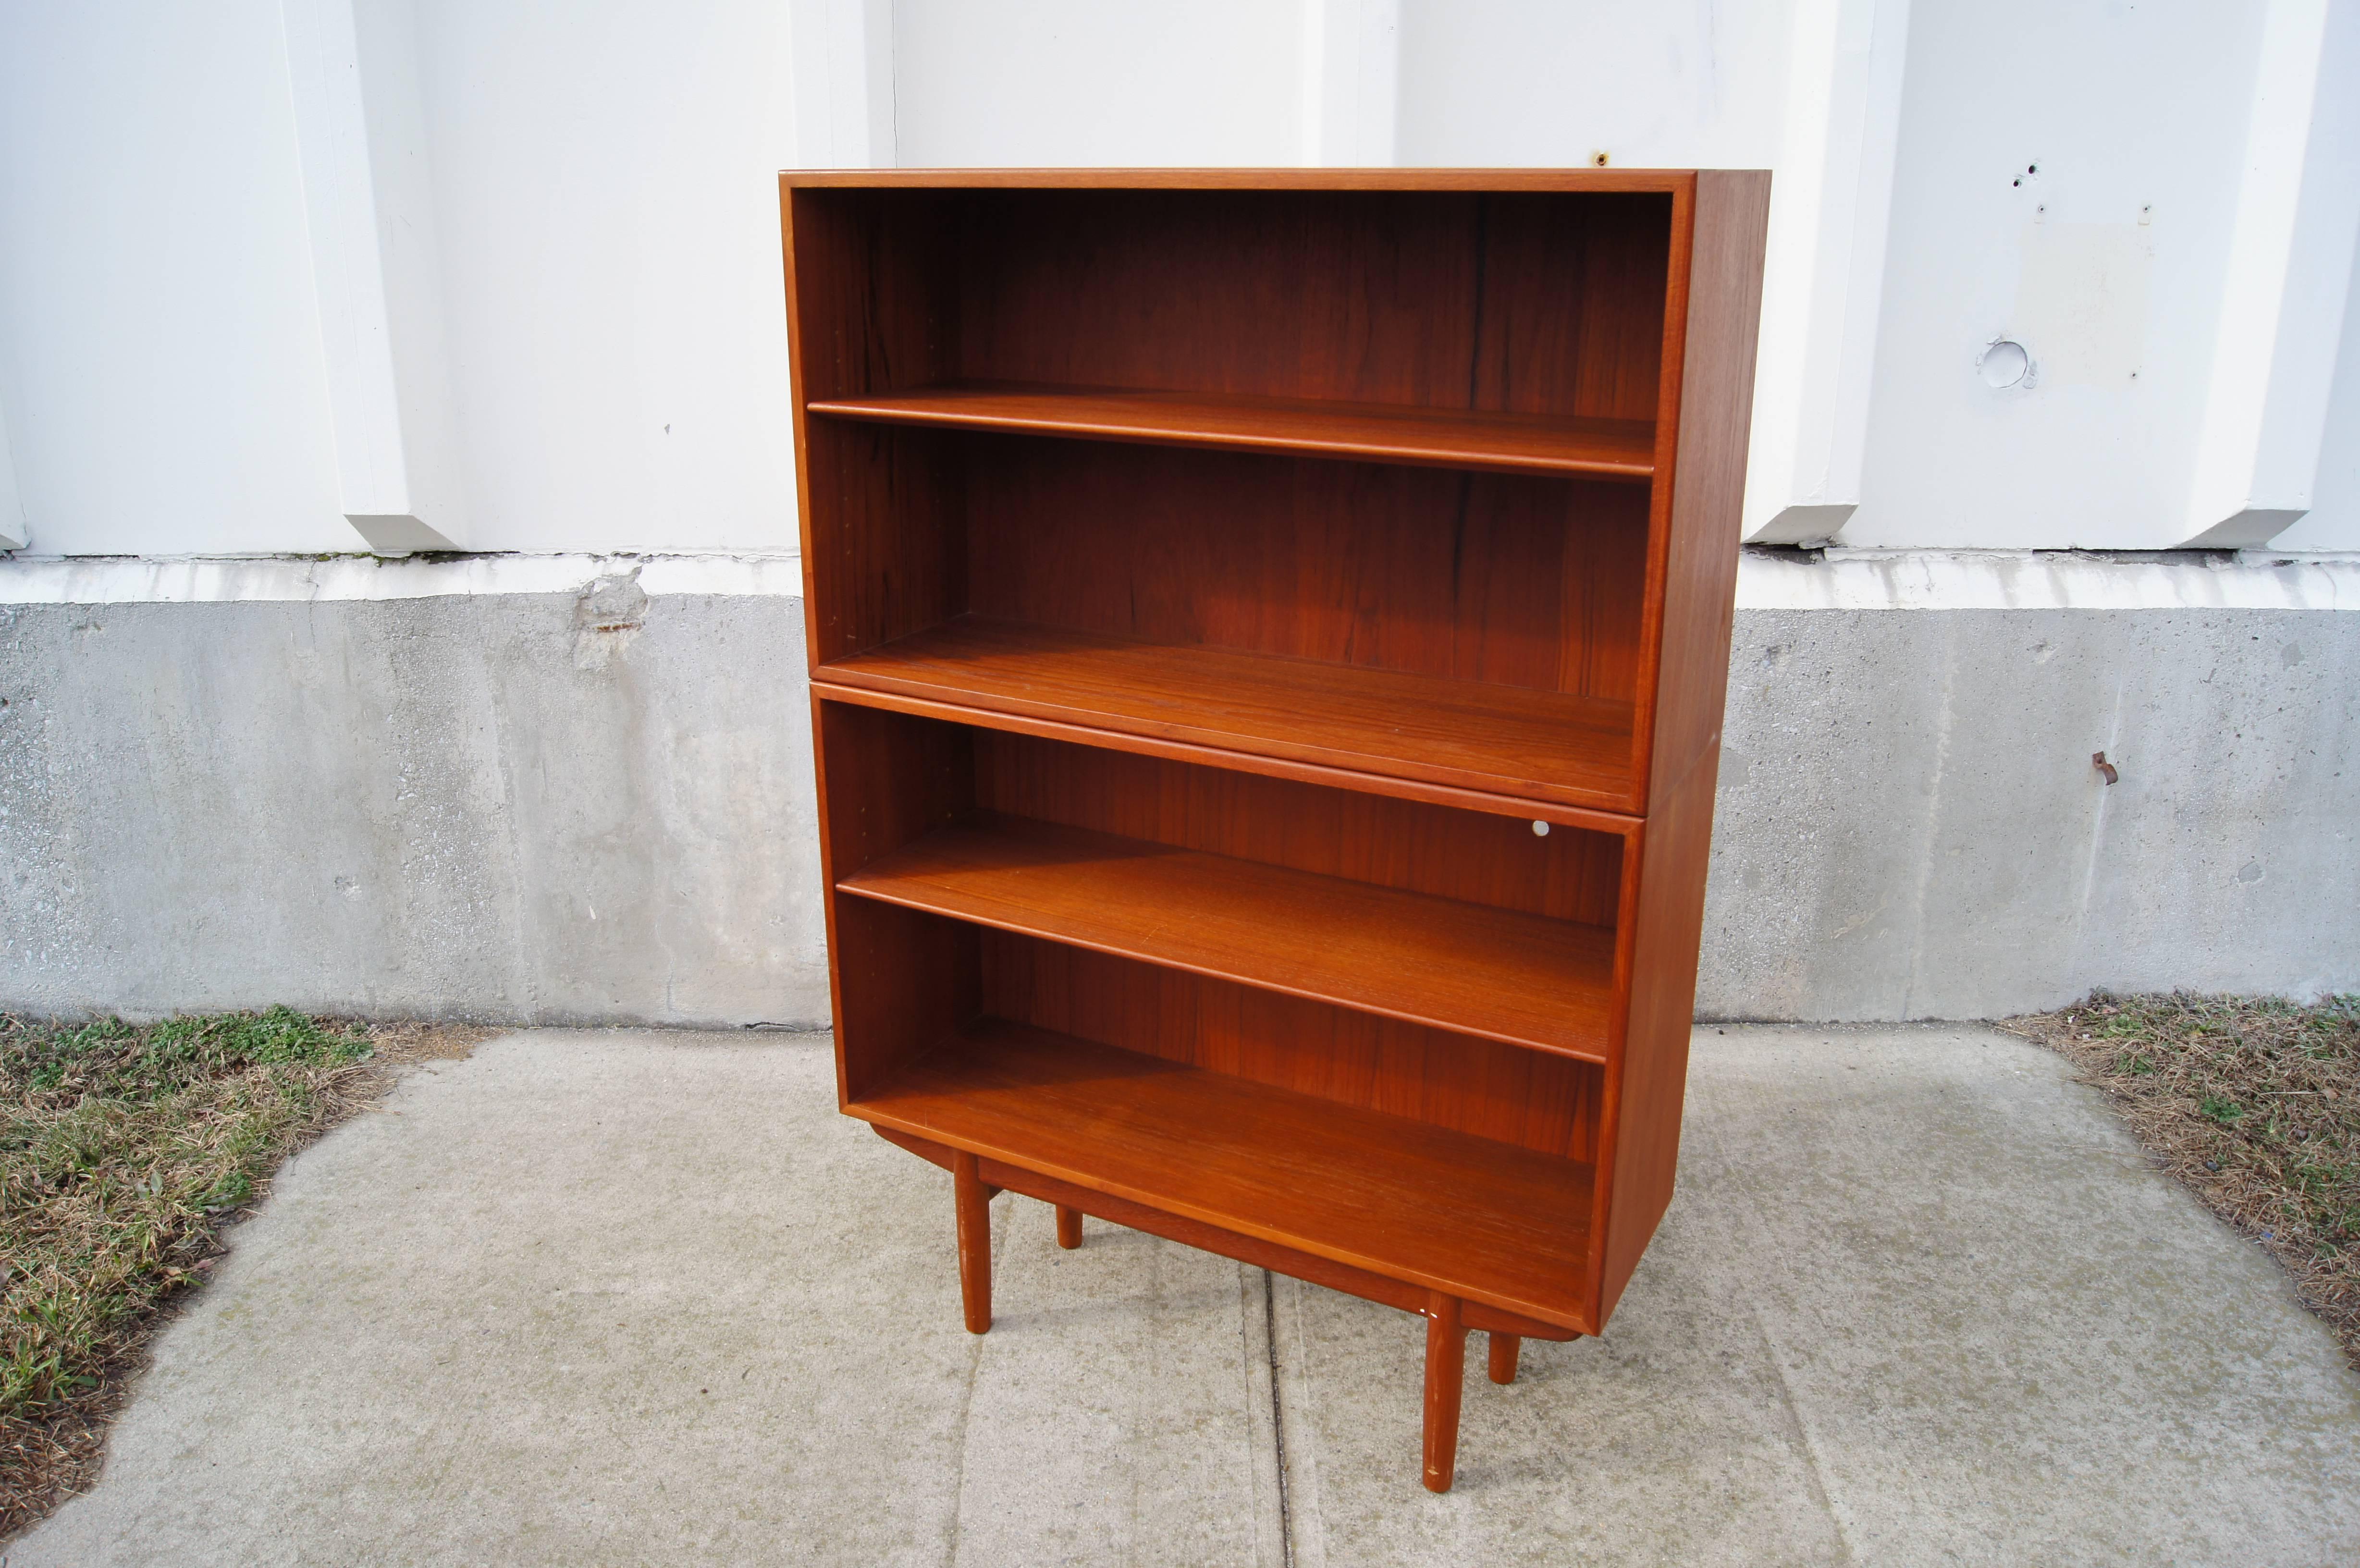 This teak bookcase exemplifies the solid simplicity of line typical of its Danish designer Børge Mogensen. It is constructed in two pieces, each with an adjustable shelf.
